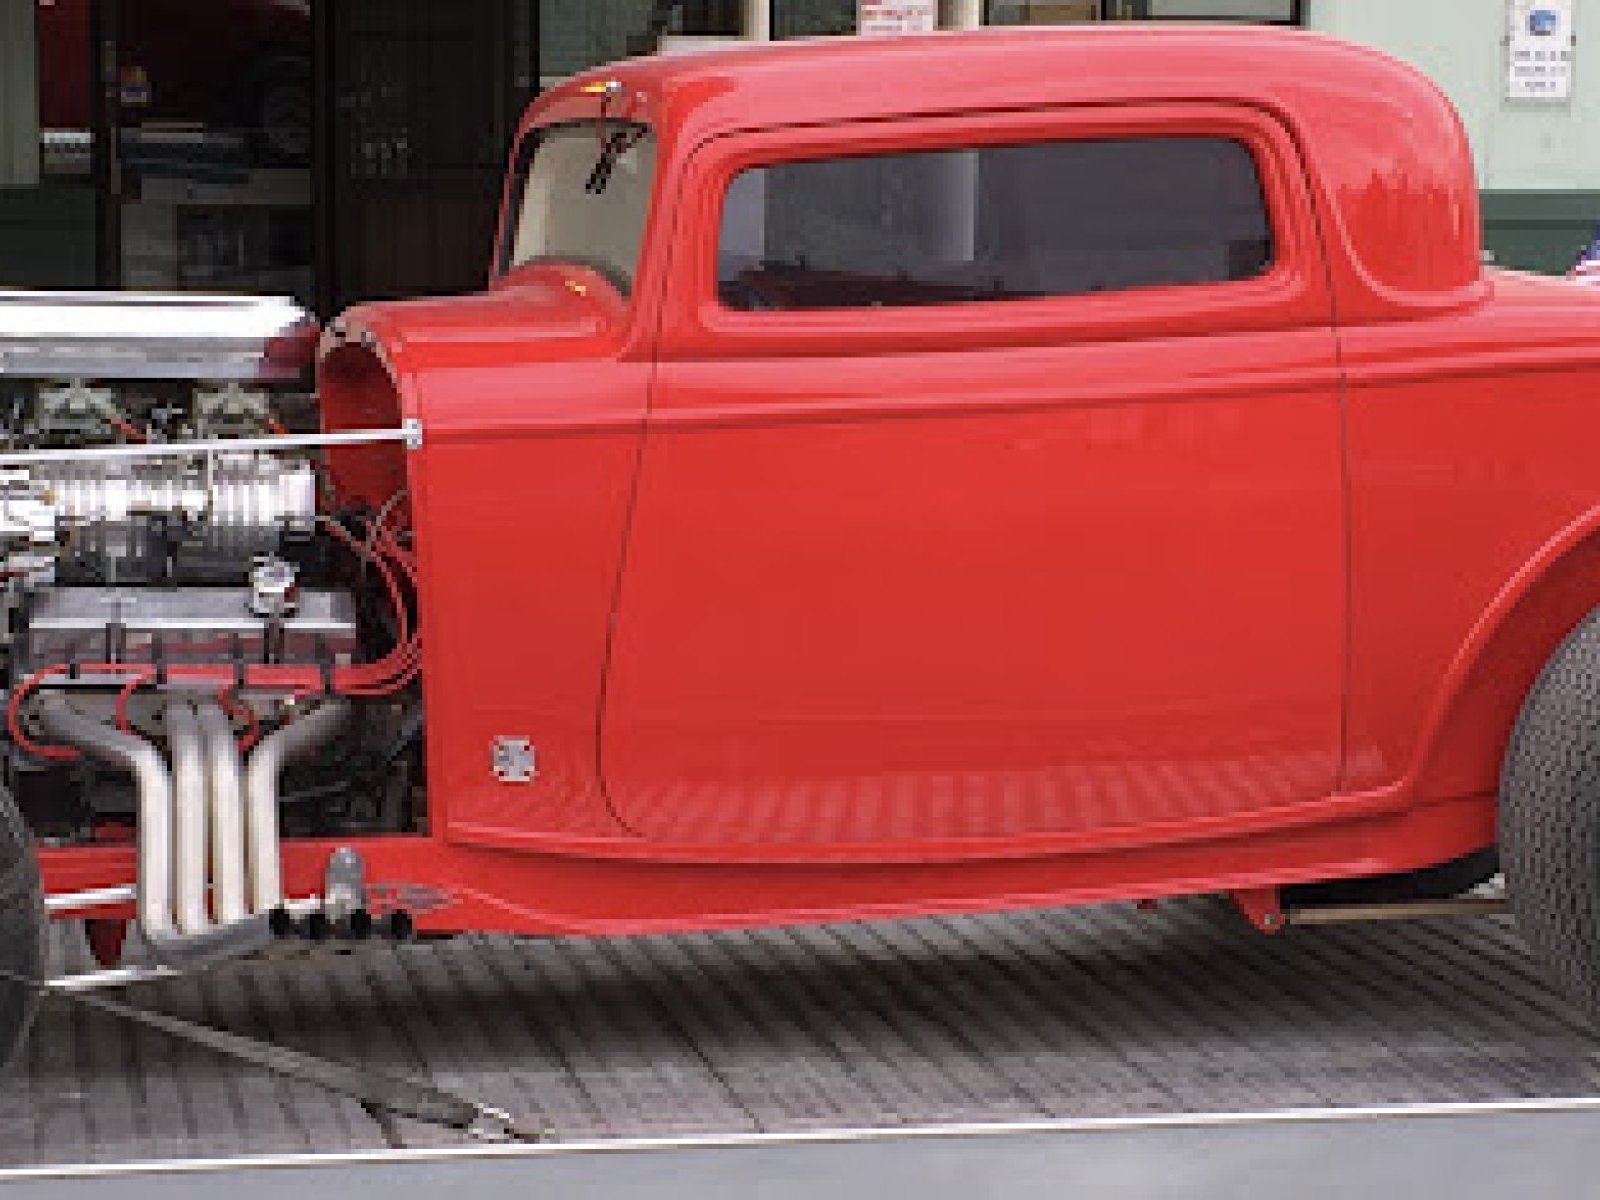 1932 Ford 3 Window Coupe Hot Rod